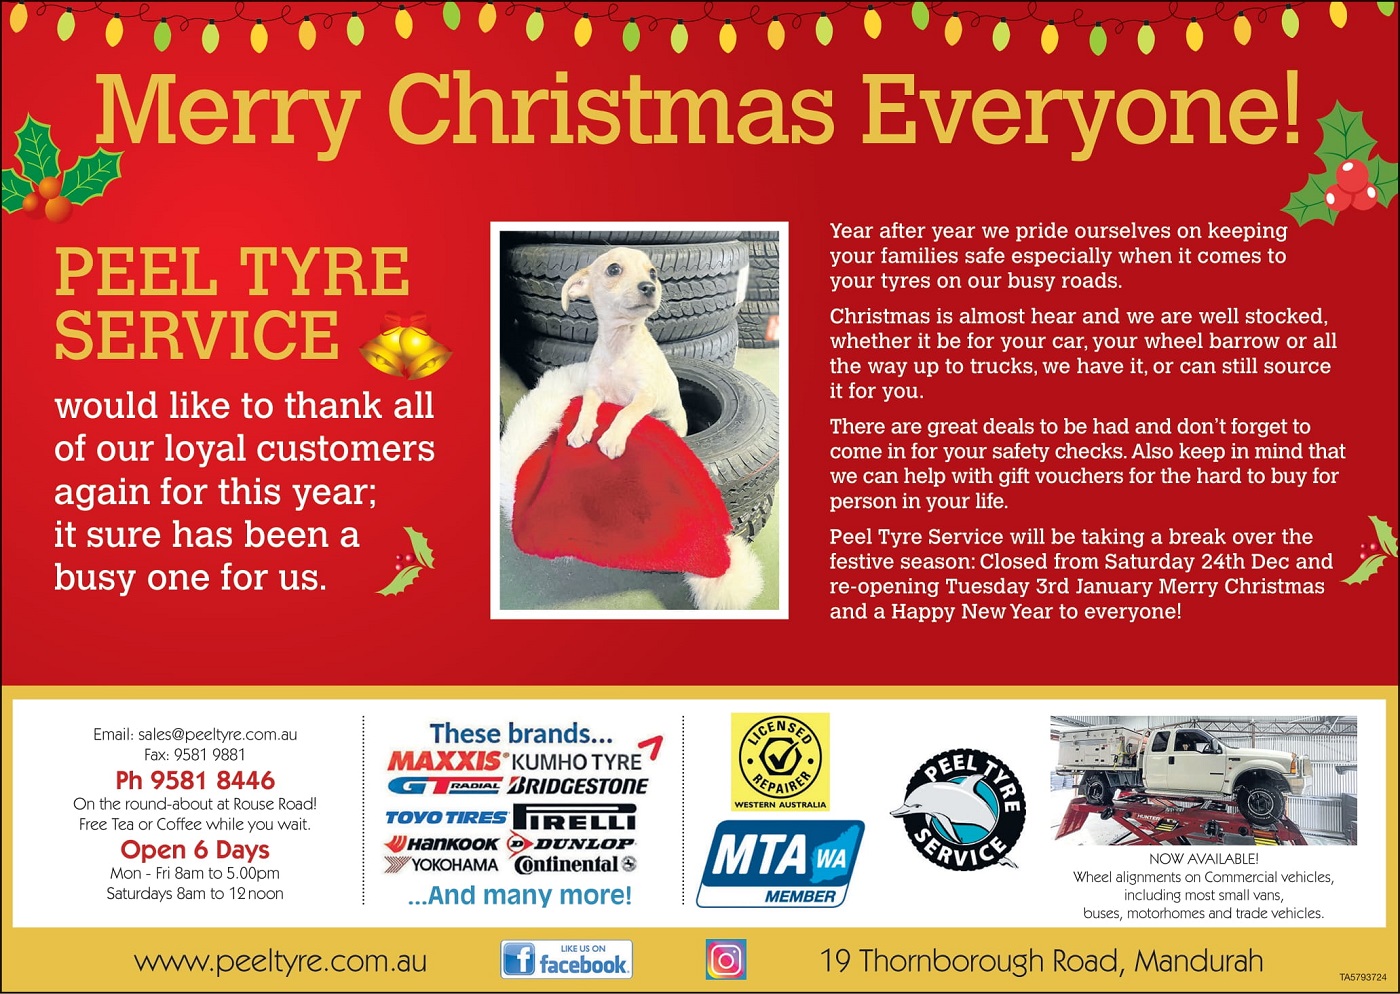 Merry Christmas from Peel Tyre Service